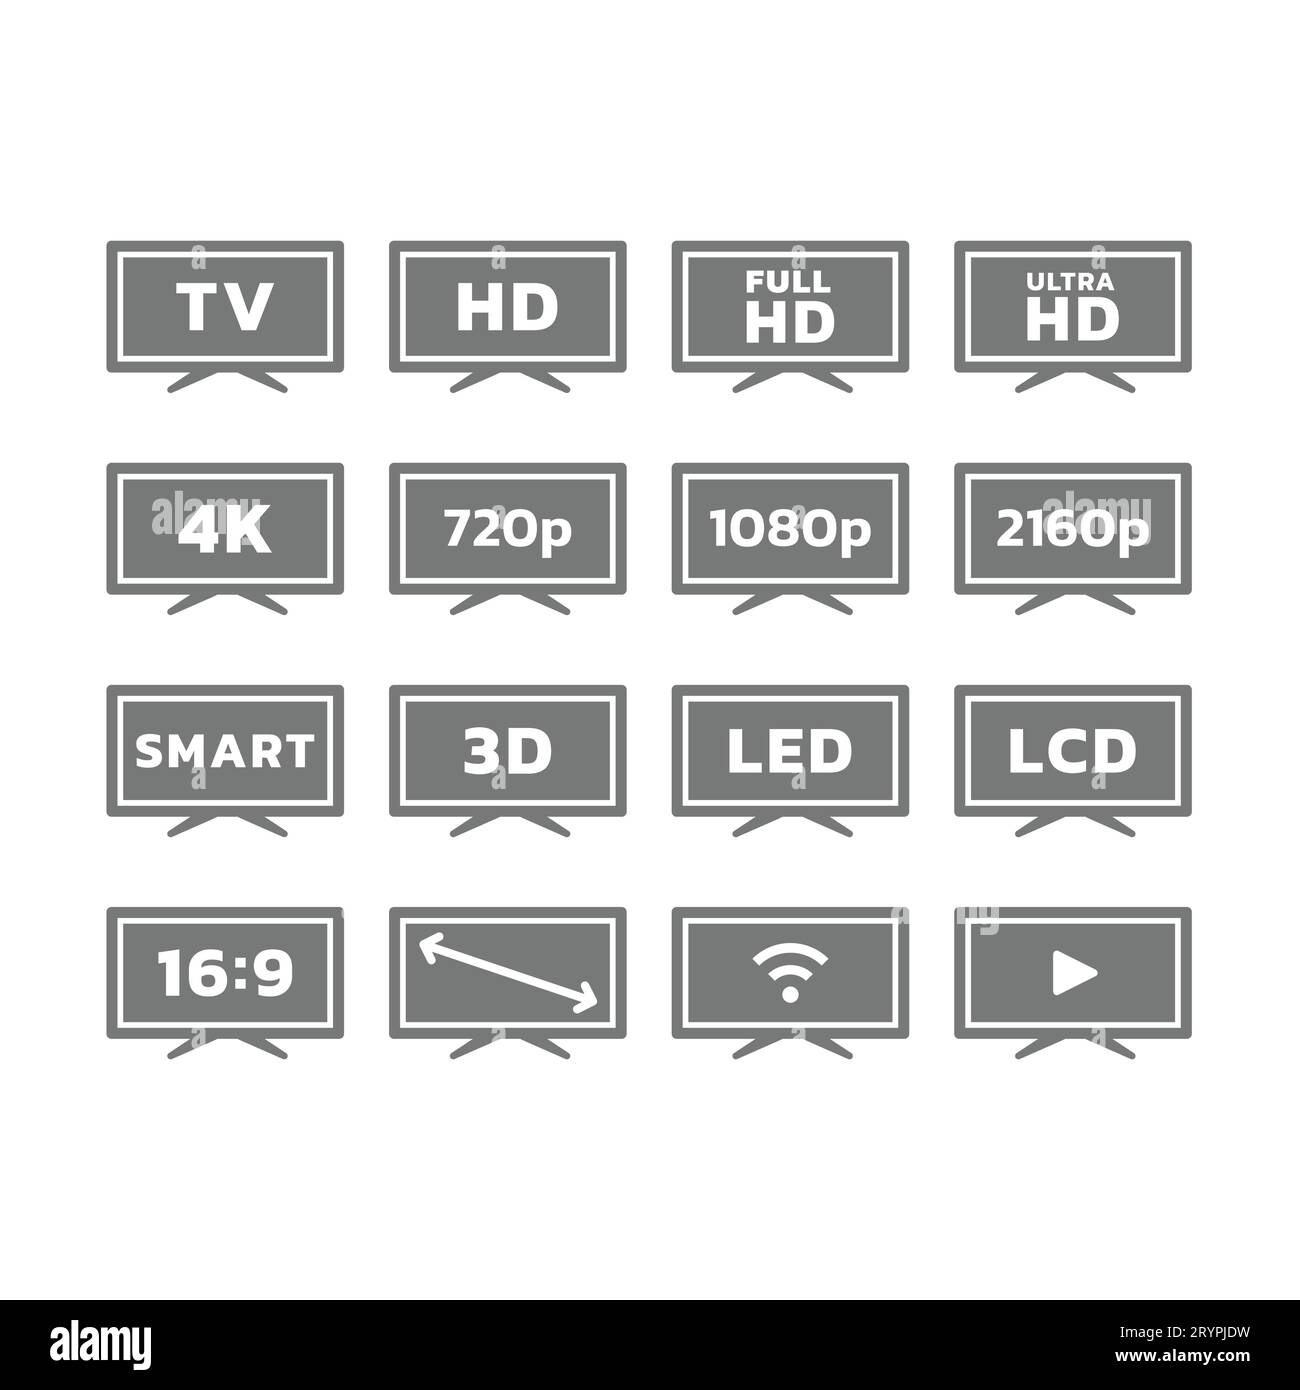 Tv set, screen resolutions and smart television icons. Full HD, Led display, ratio and video vector icon set. Stock Vector